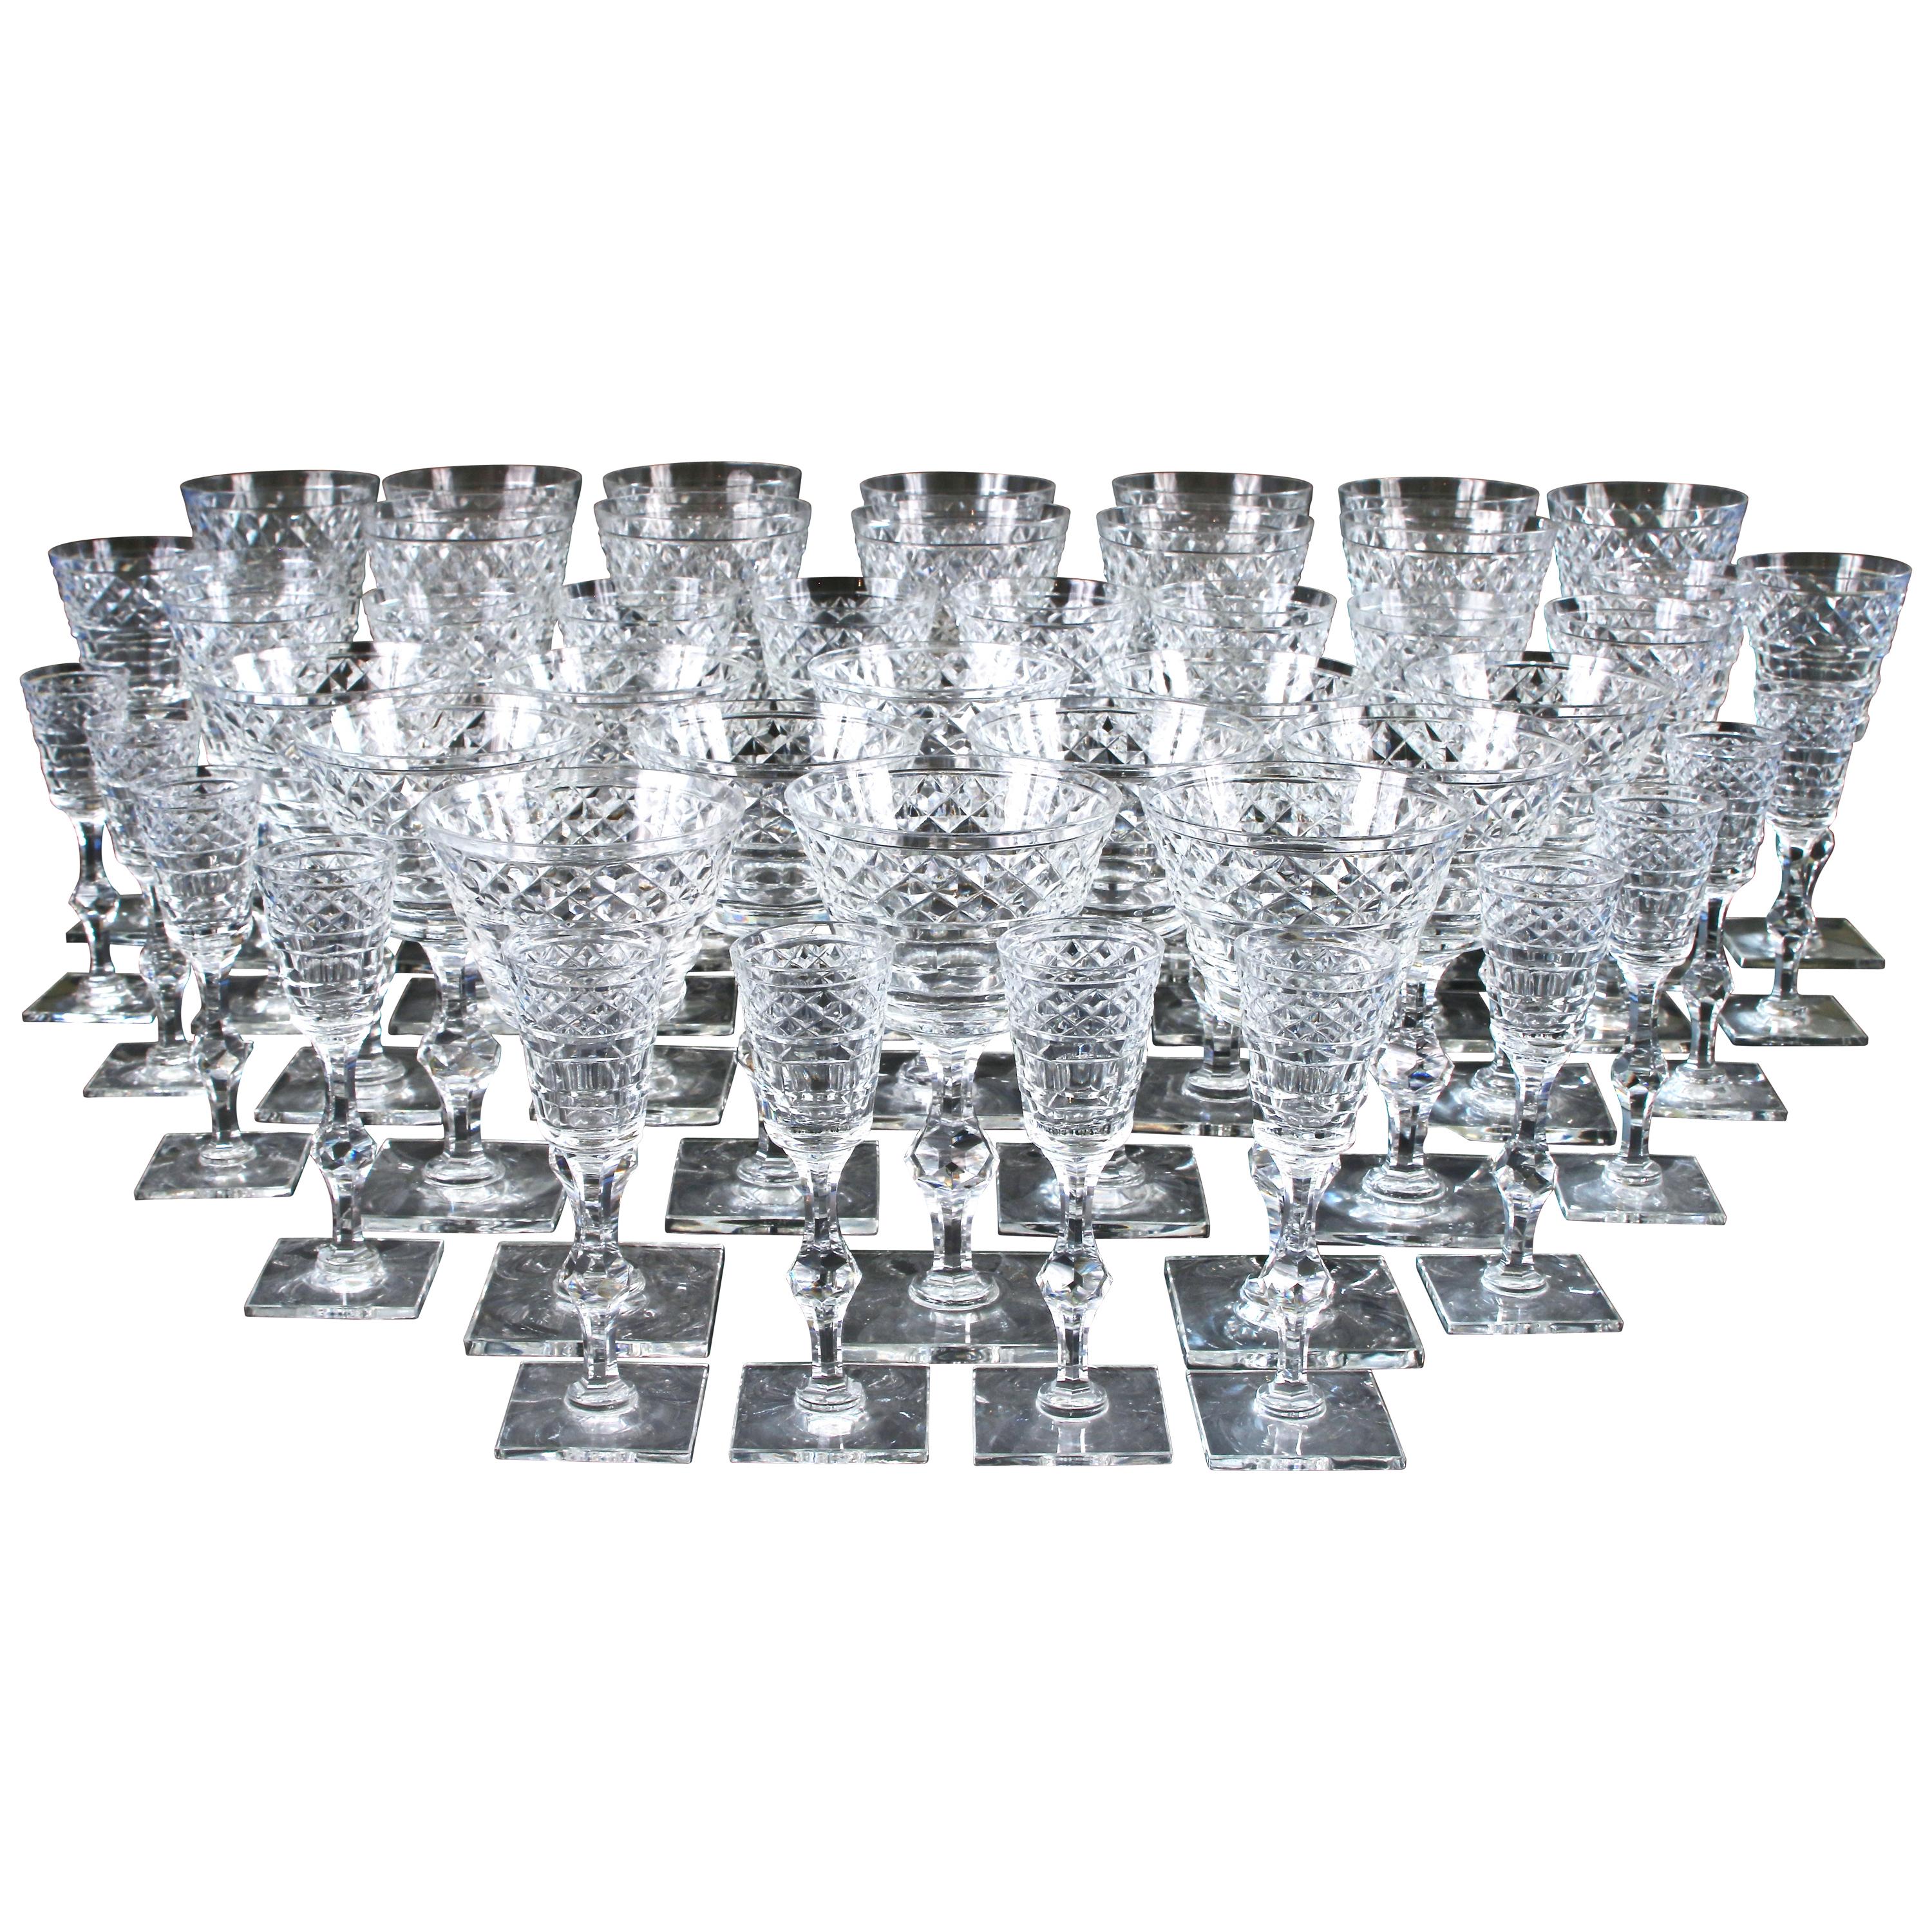 Rare Hawkes Hand-Cut Crystal Service for 12 For Sale